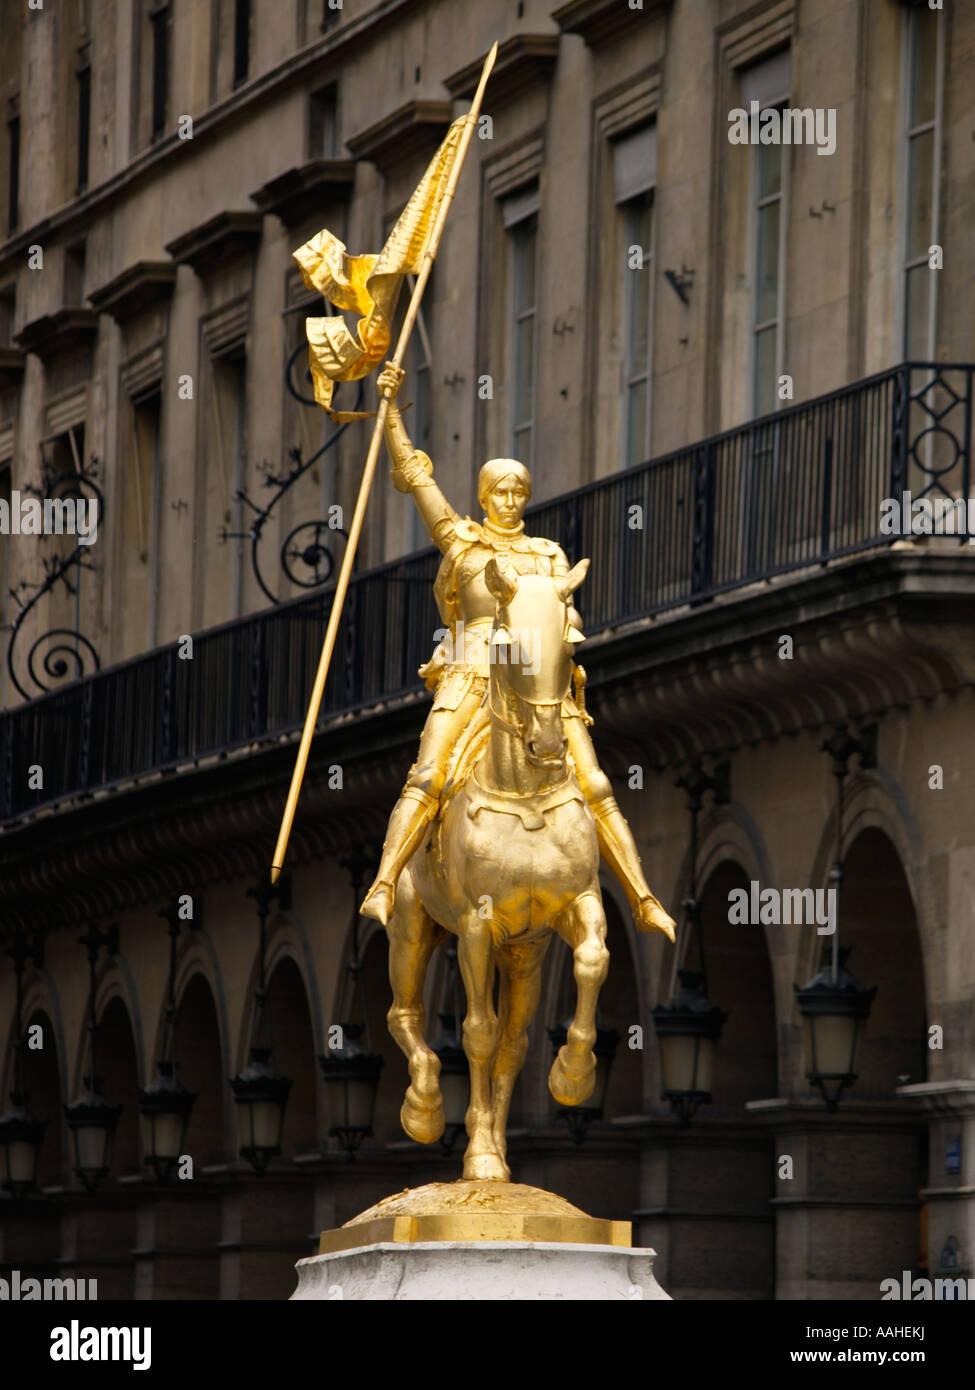 Statue of Joan of Arc Jeanne d'Arc the maid of Orleans in Paris France Stock Photo